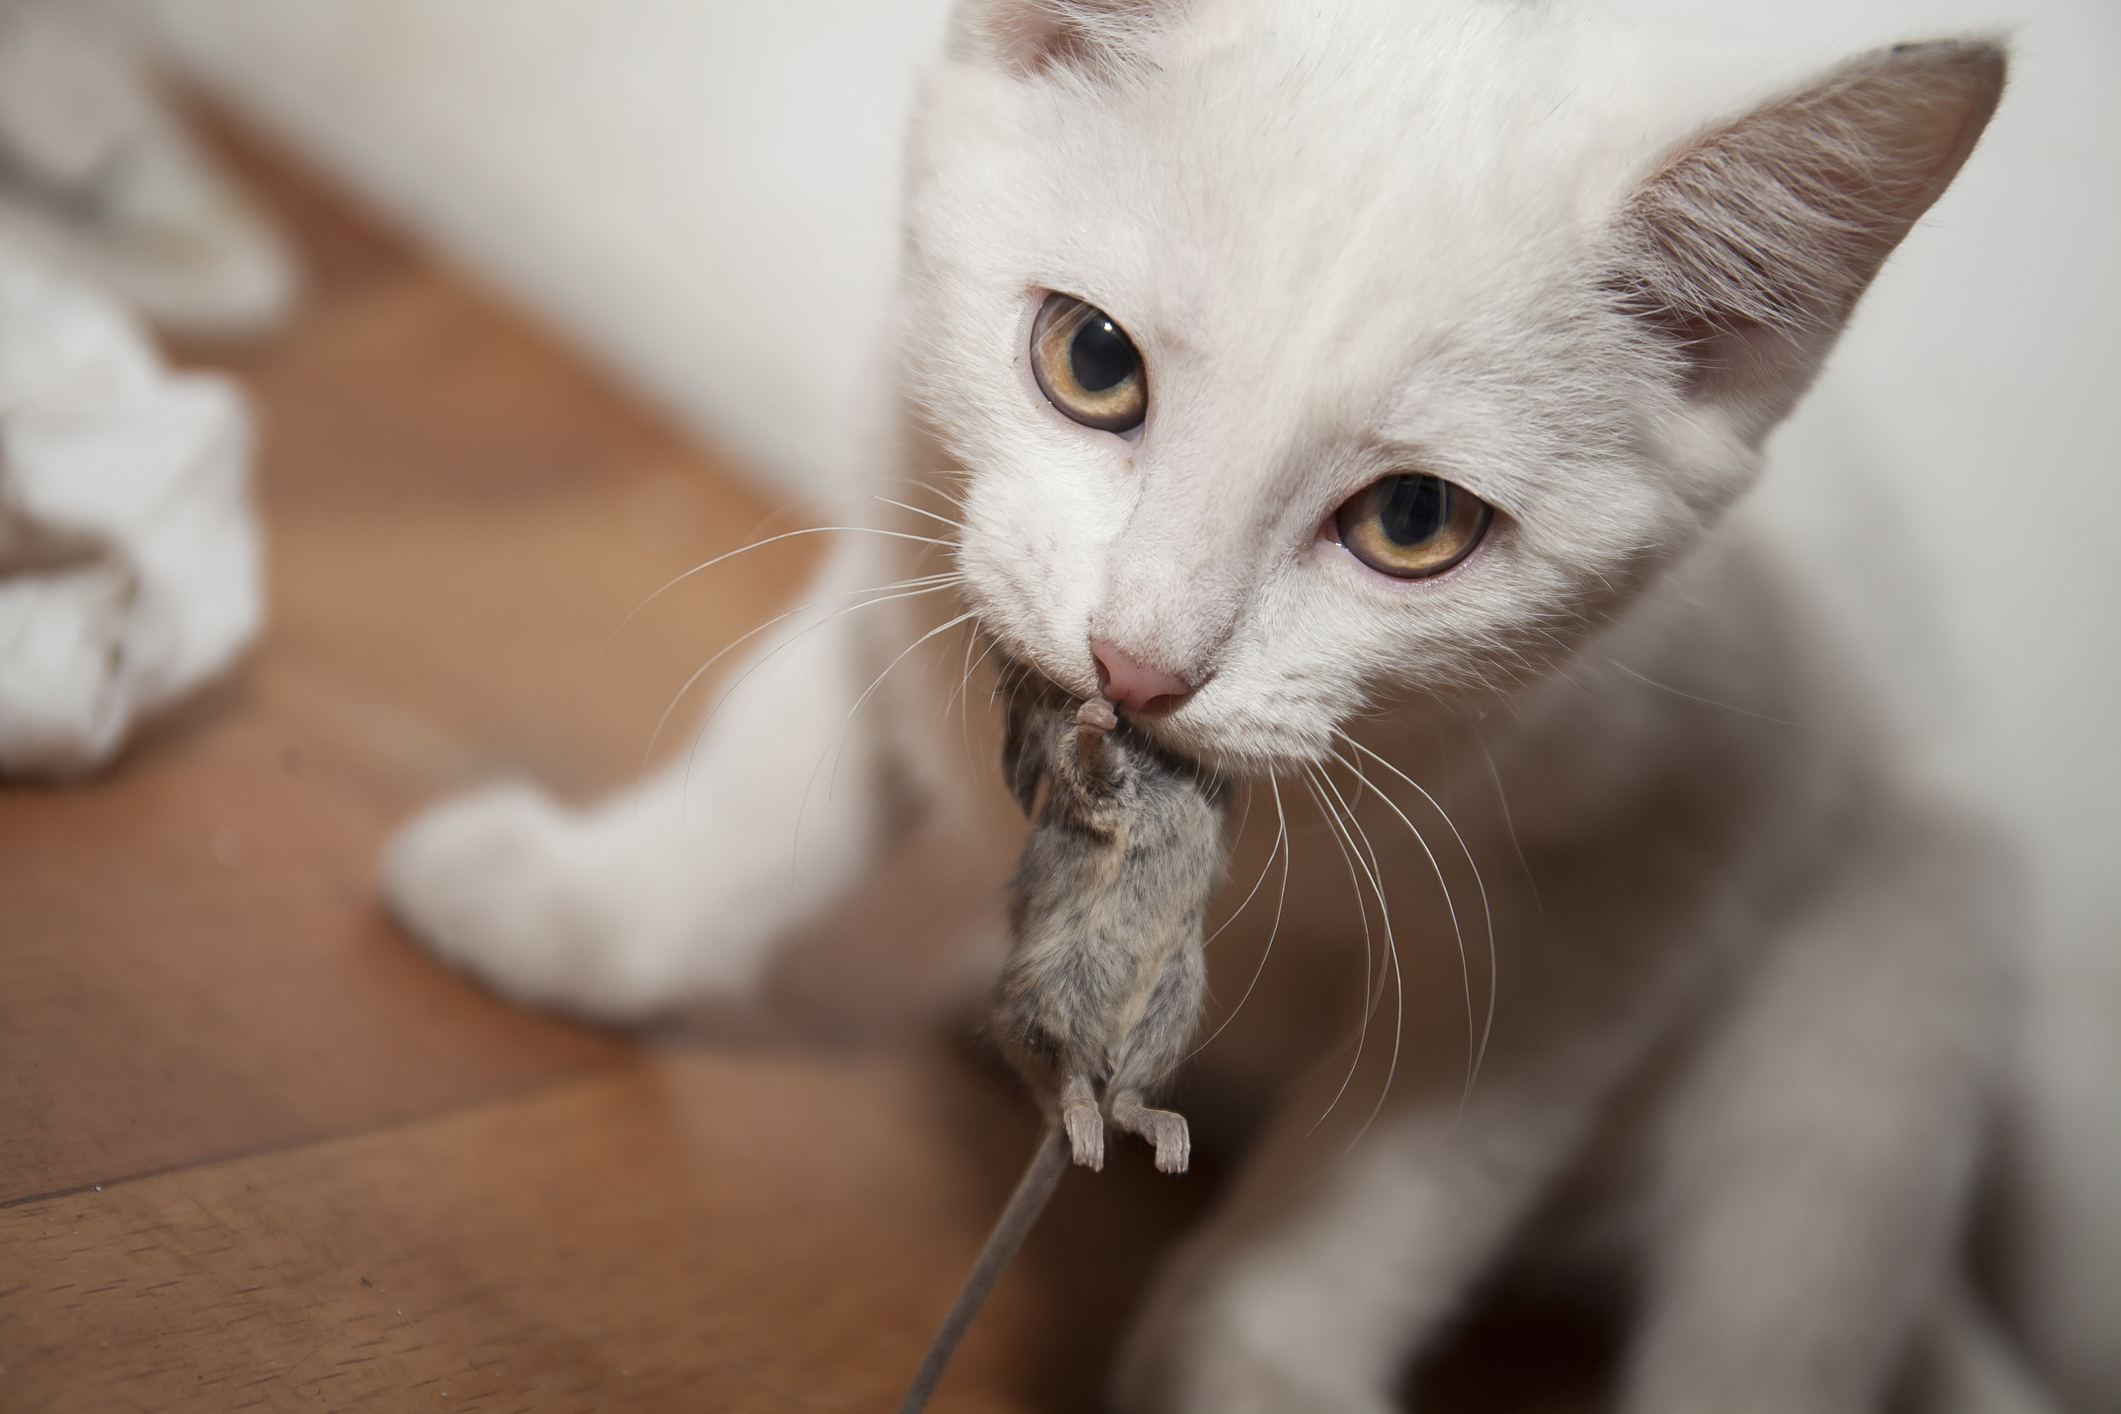 I Got You a Gift': Cat Surprises Owner With Live Mouse in Wild